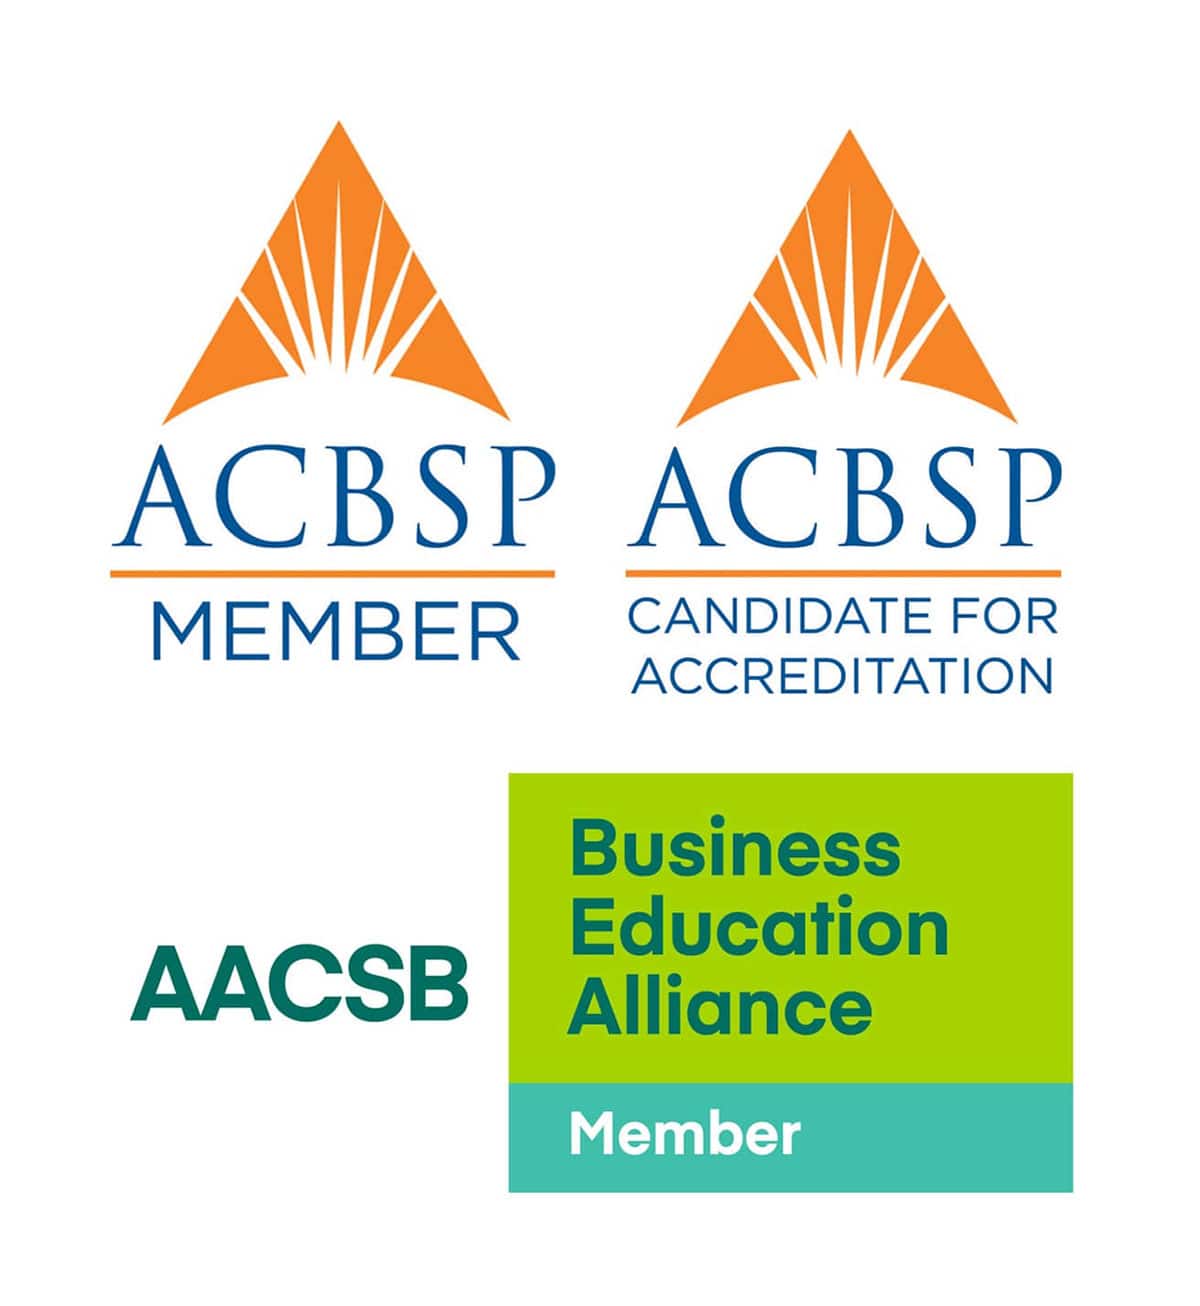 ACBSP and AACSB Business Education Alliance member logos in a vertical orientation. 